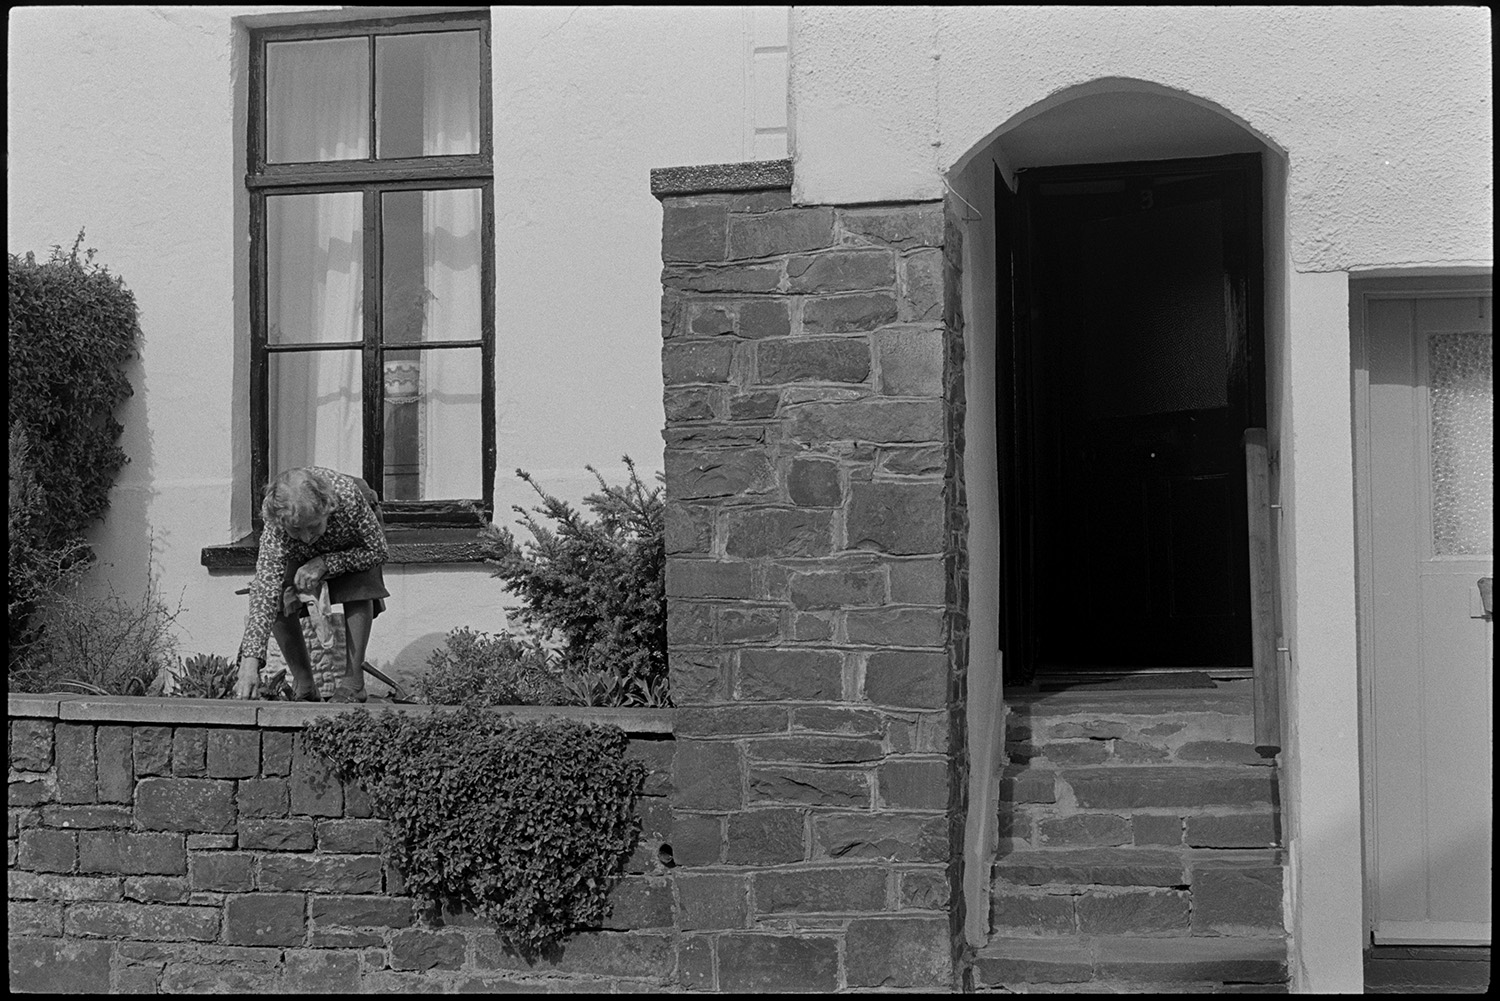 Woman gardening in small patio and sitting chatting to photographer.
[Mrs Bussell working in her front garden in Leigh Road, Chulmleigh. Steps leading up to an archway and the front door of the house are also visible.]